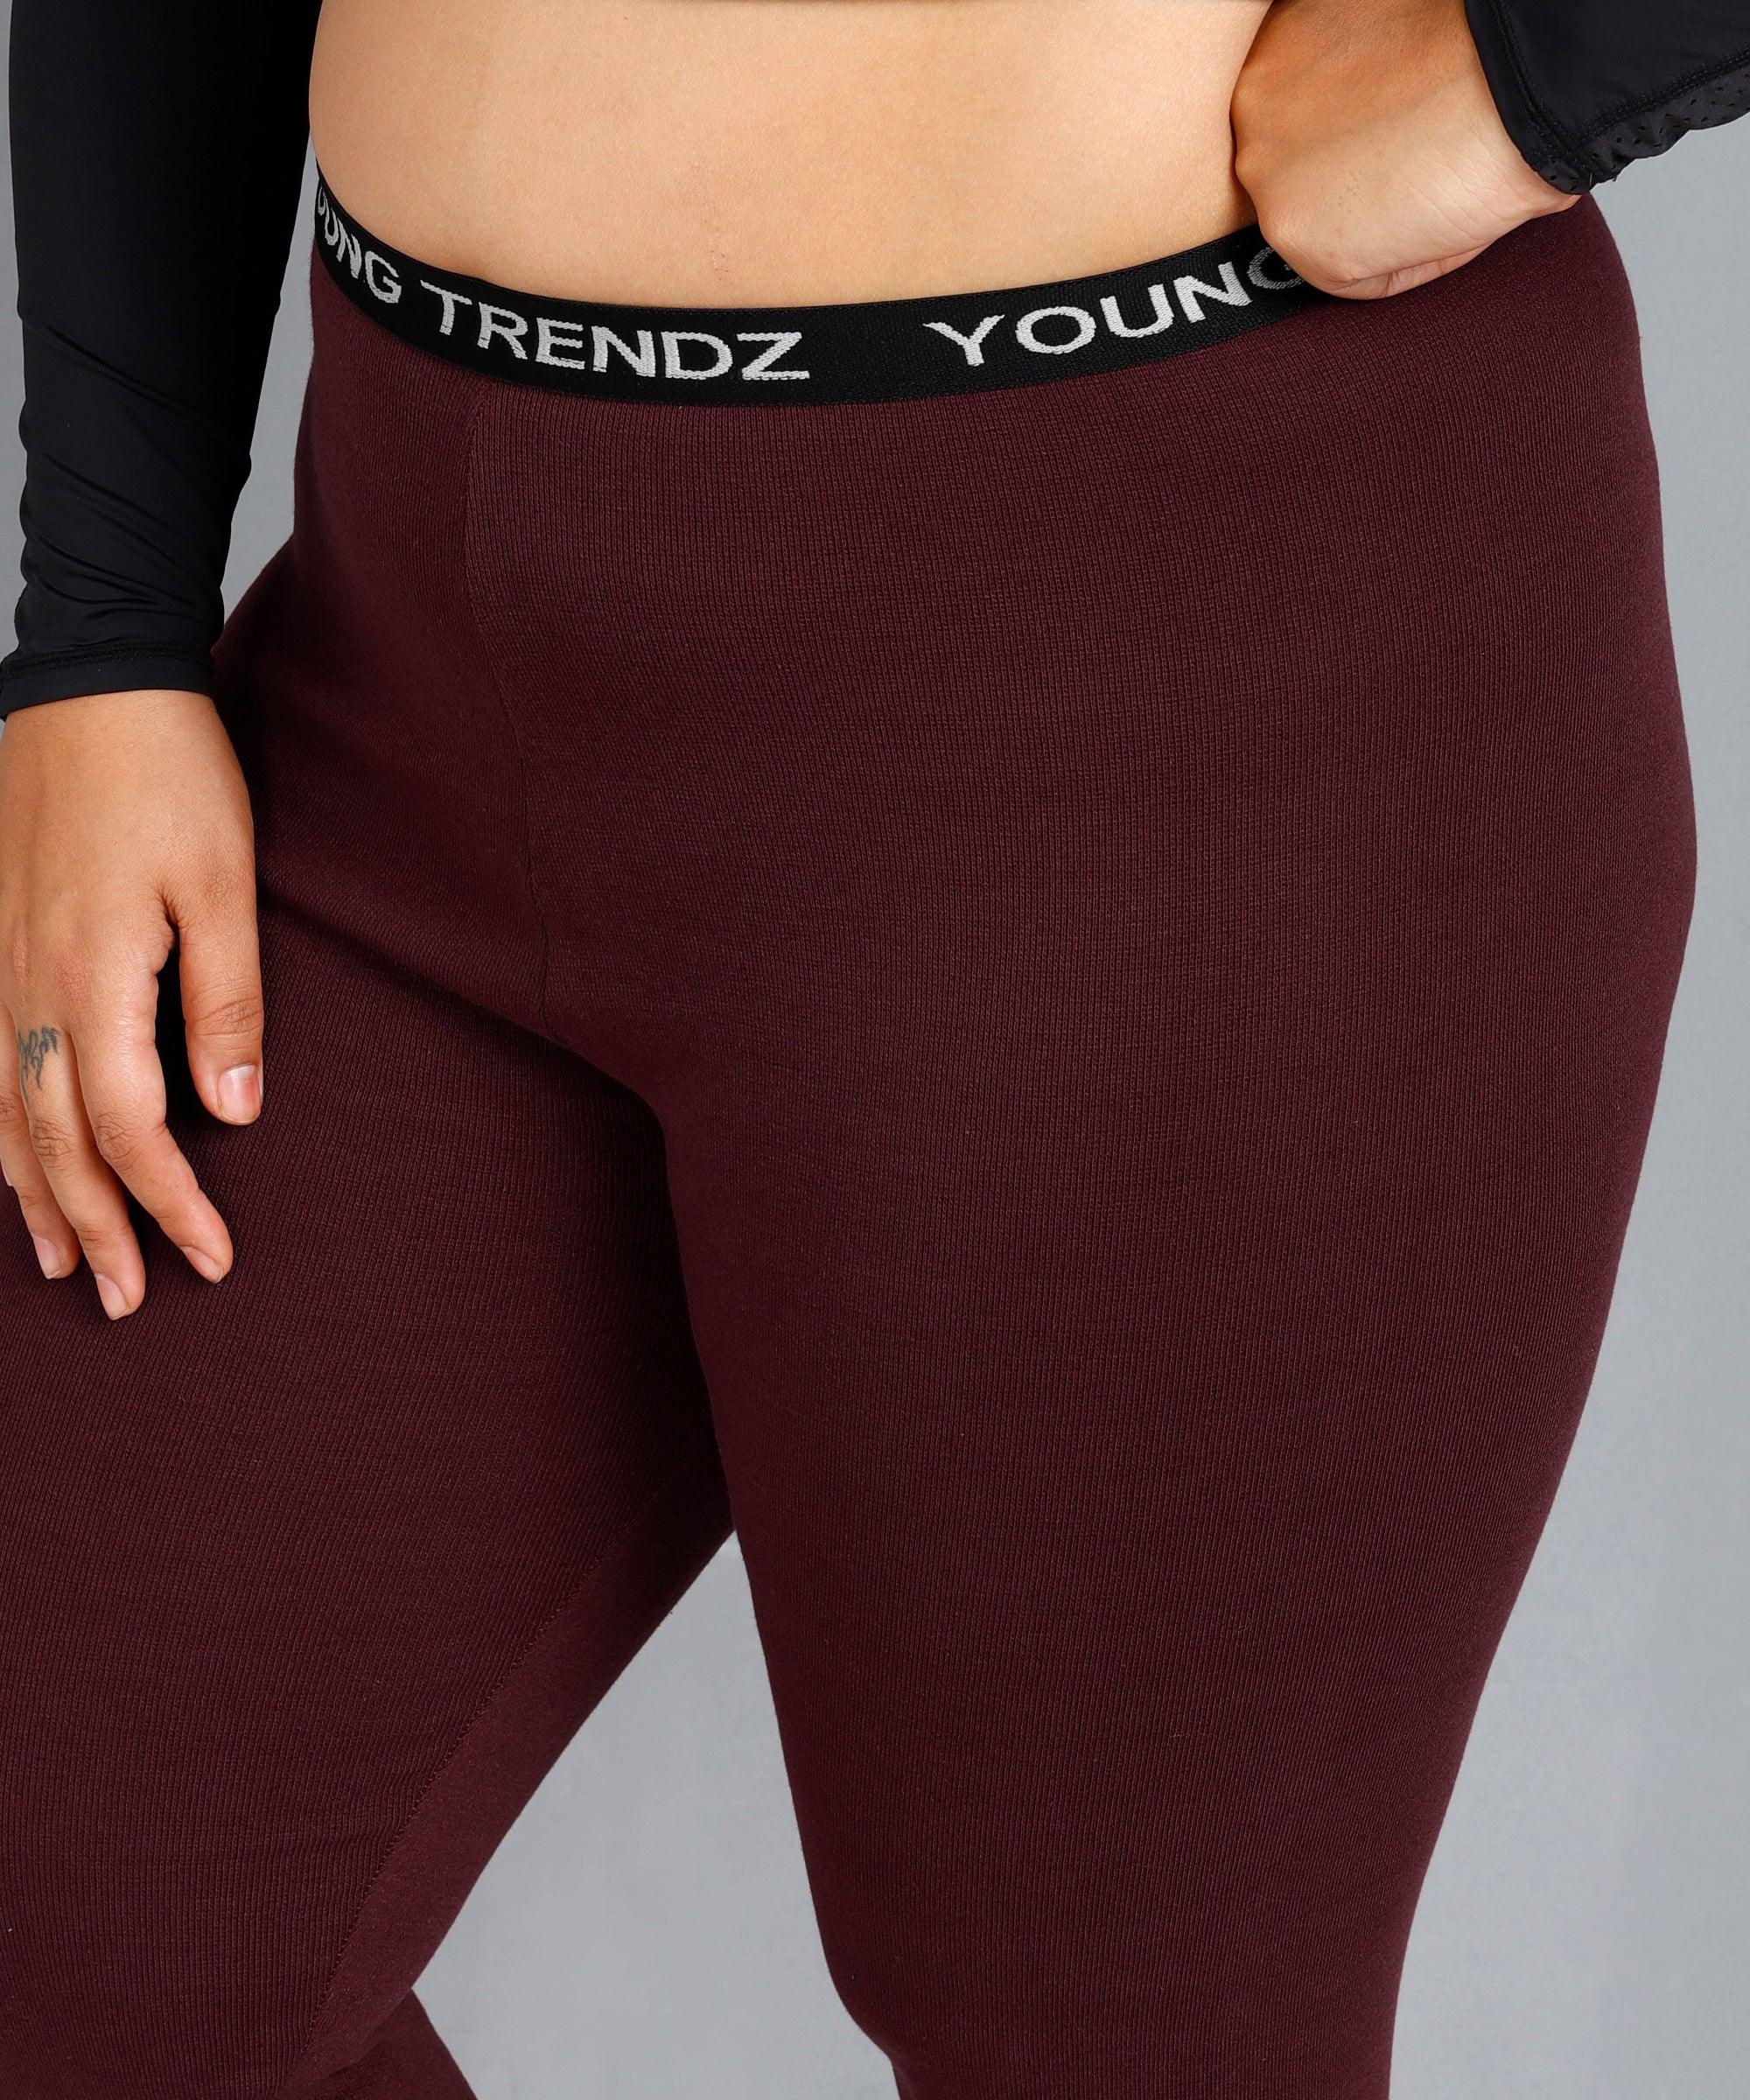 WomenSolid Tights Plus Size (Maroon) – Young Trendz